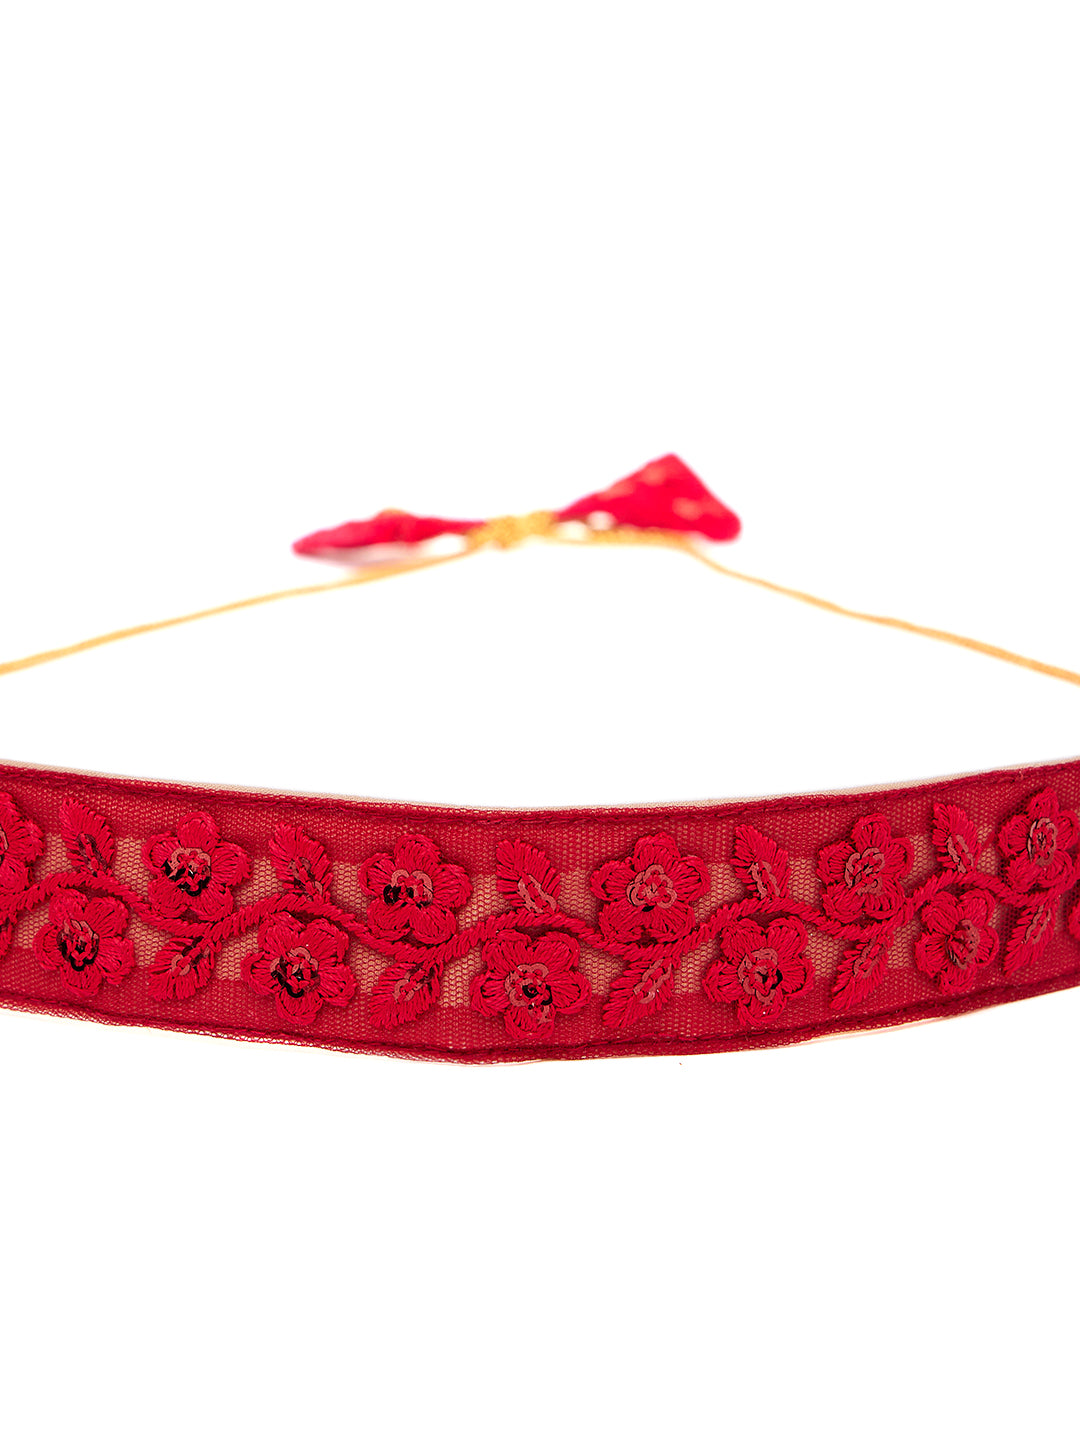 Athena Women Red Embroidered Sequined Belt - Athena Lifestyle